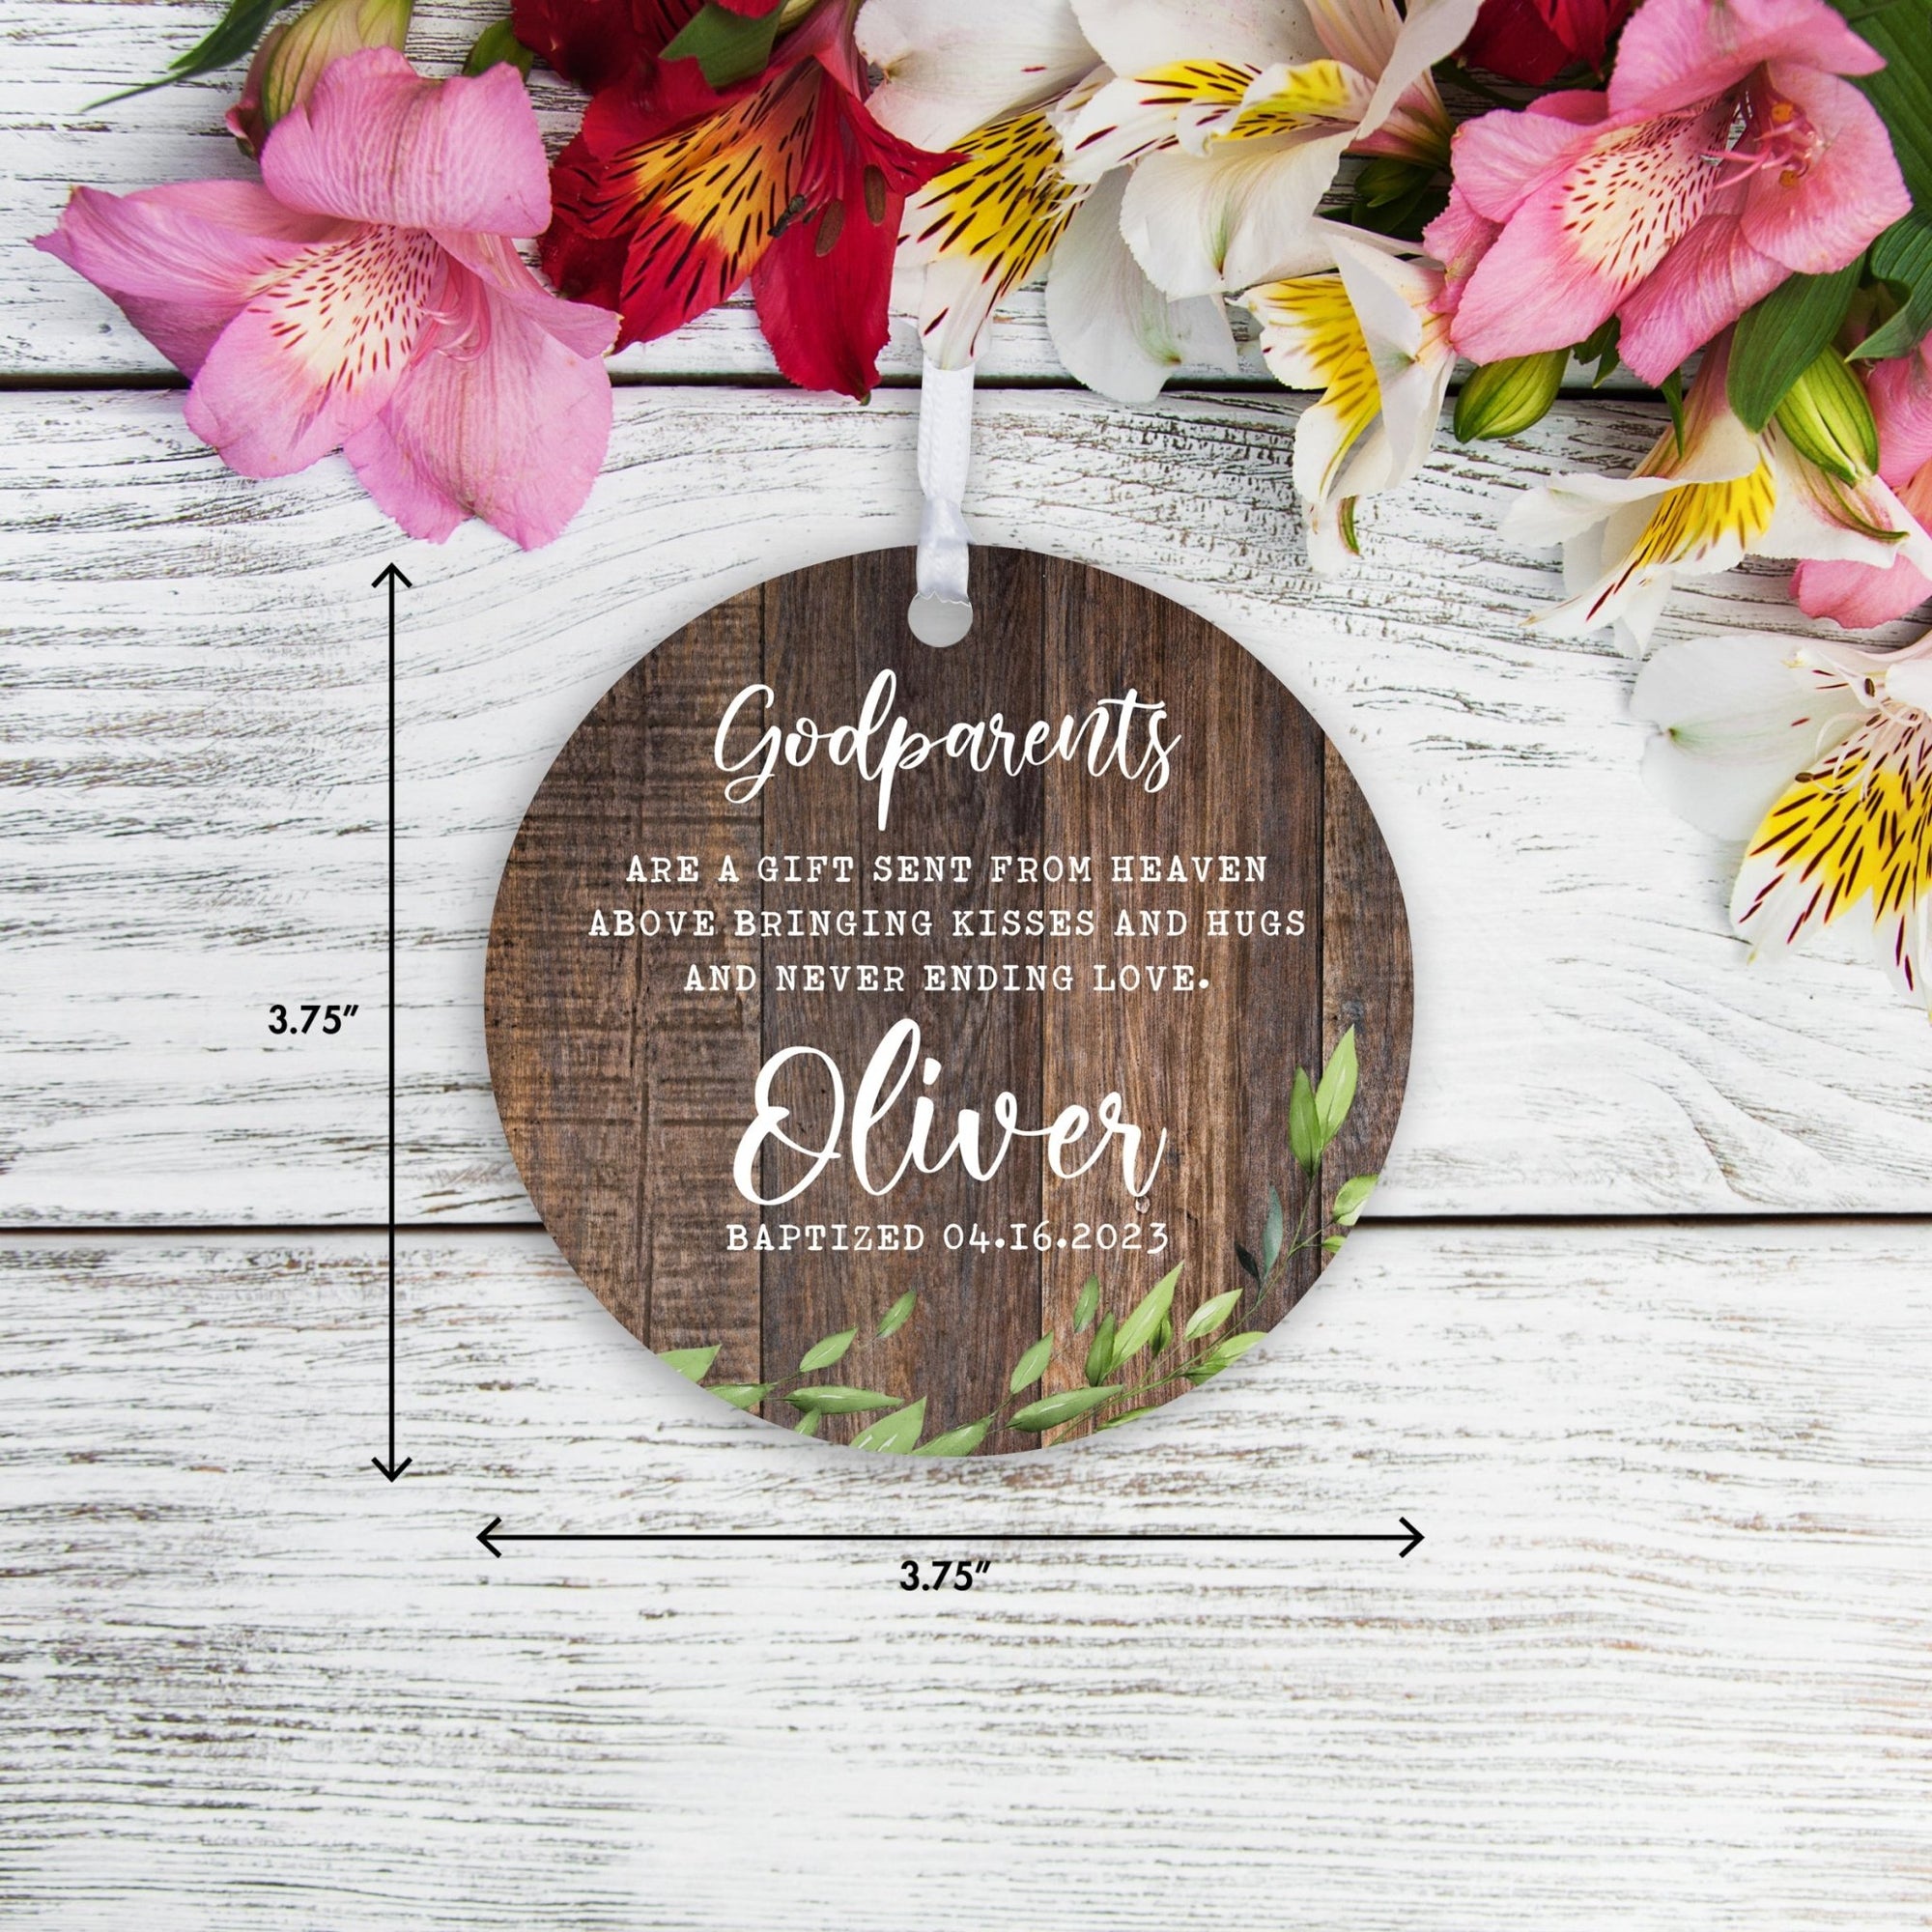 Personalized Unique Wooden Baptism Ornament Gift for Godchild - A Gift Sent From Heaven - LifeSong Milestones